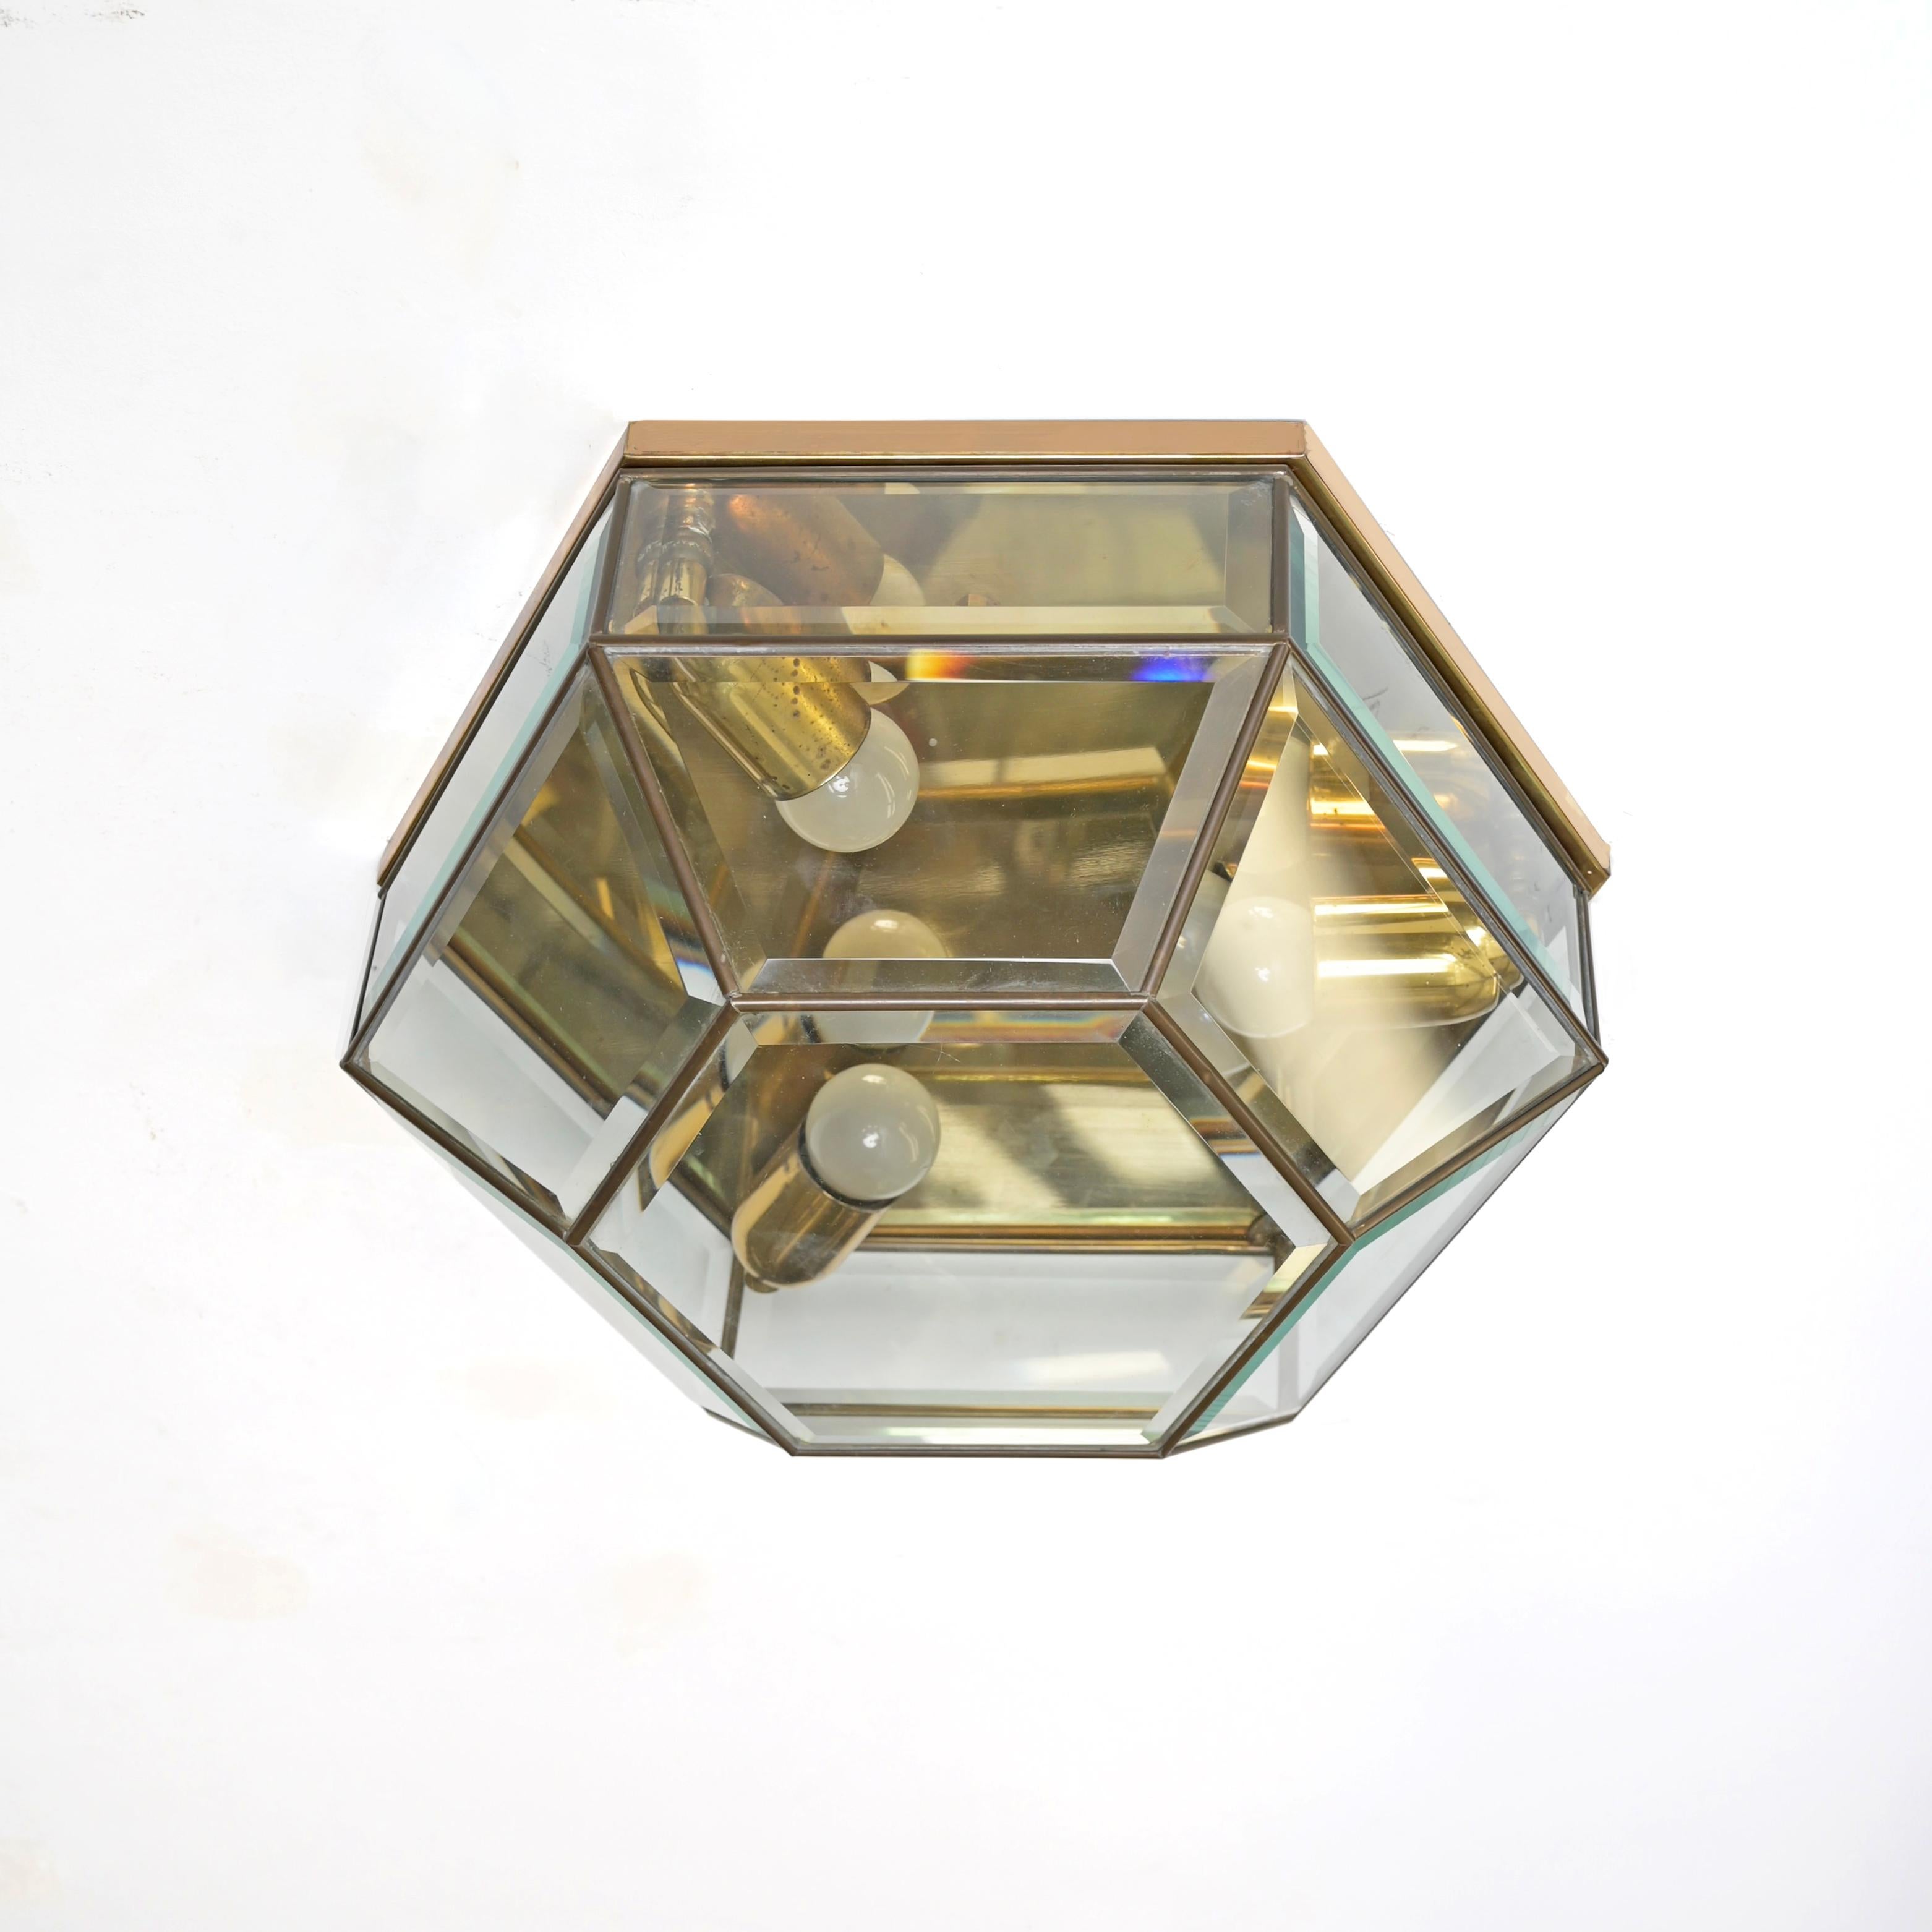 Italian Brass and Beveled Glass Hexagonal Sconce or Ceiling Lamp Fontana Arte Italy 1950 For Sale